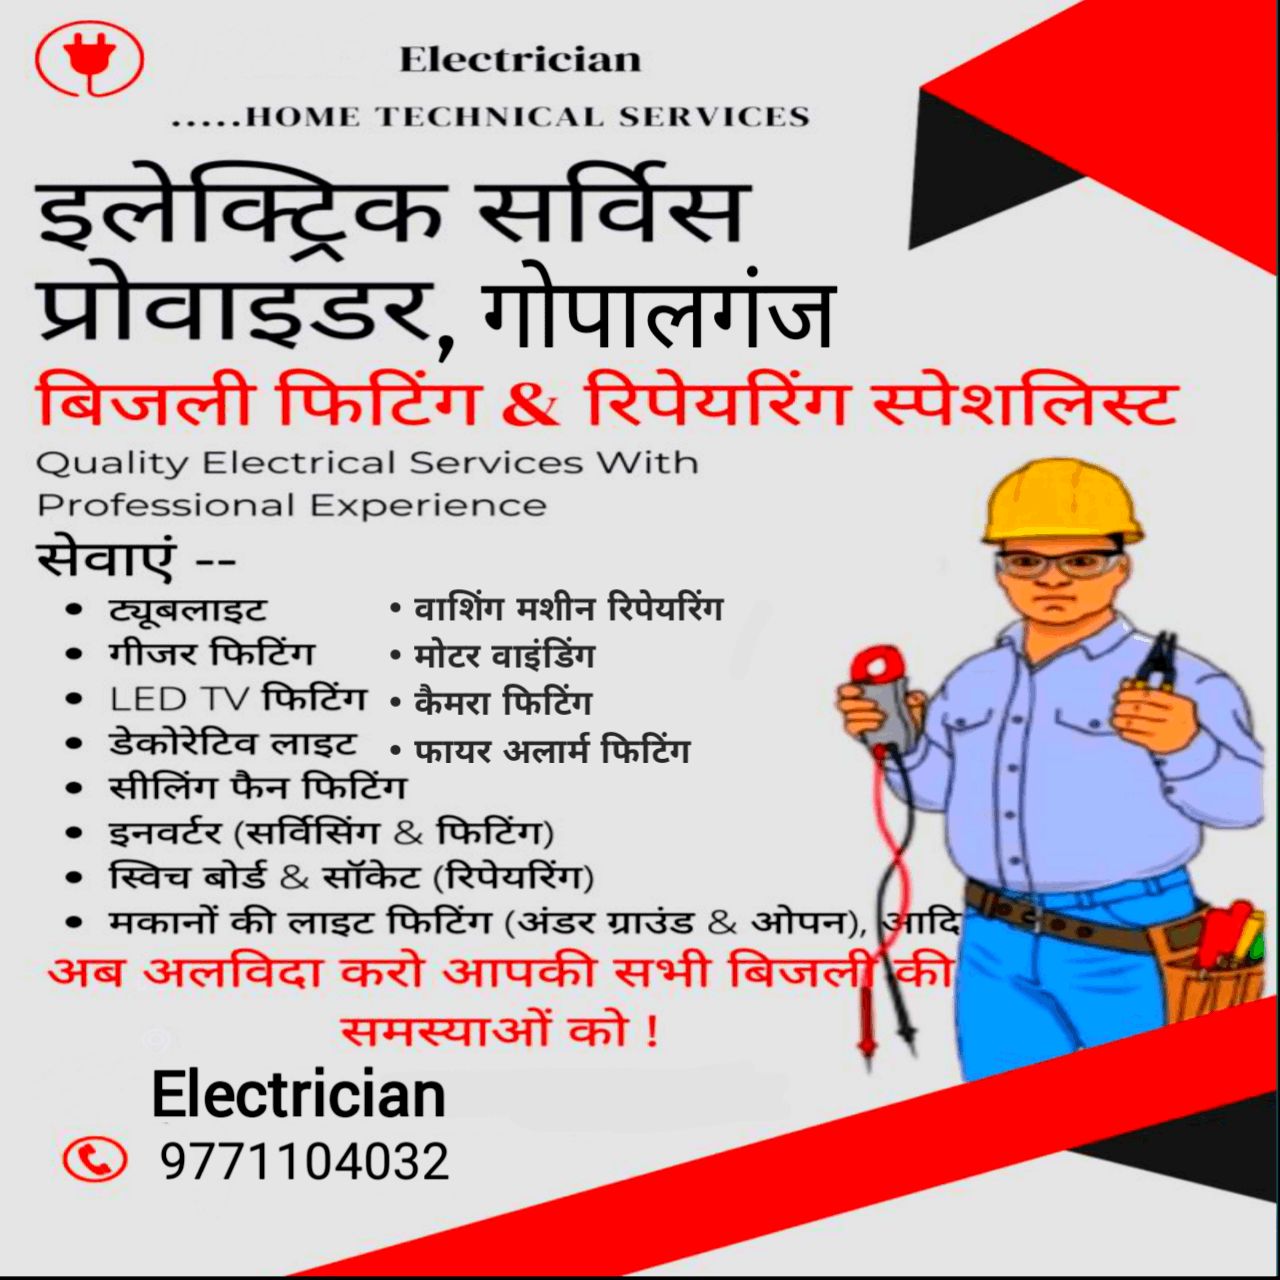 Electrician; Exp: More than 15 year